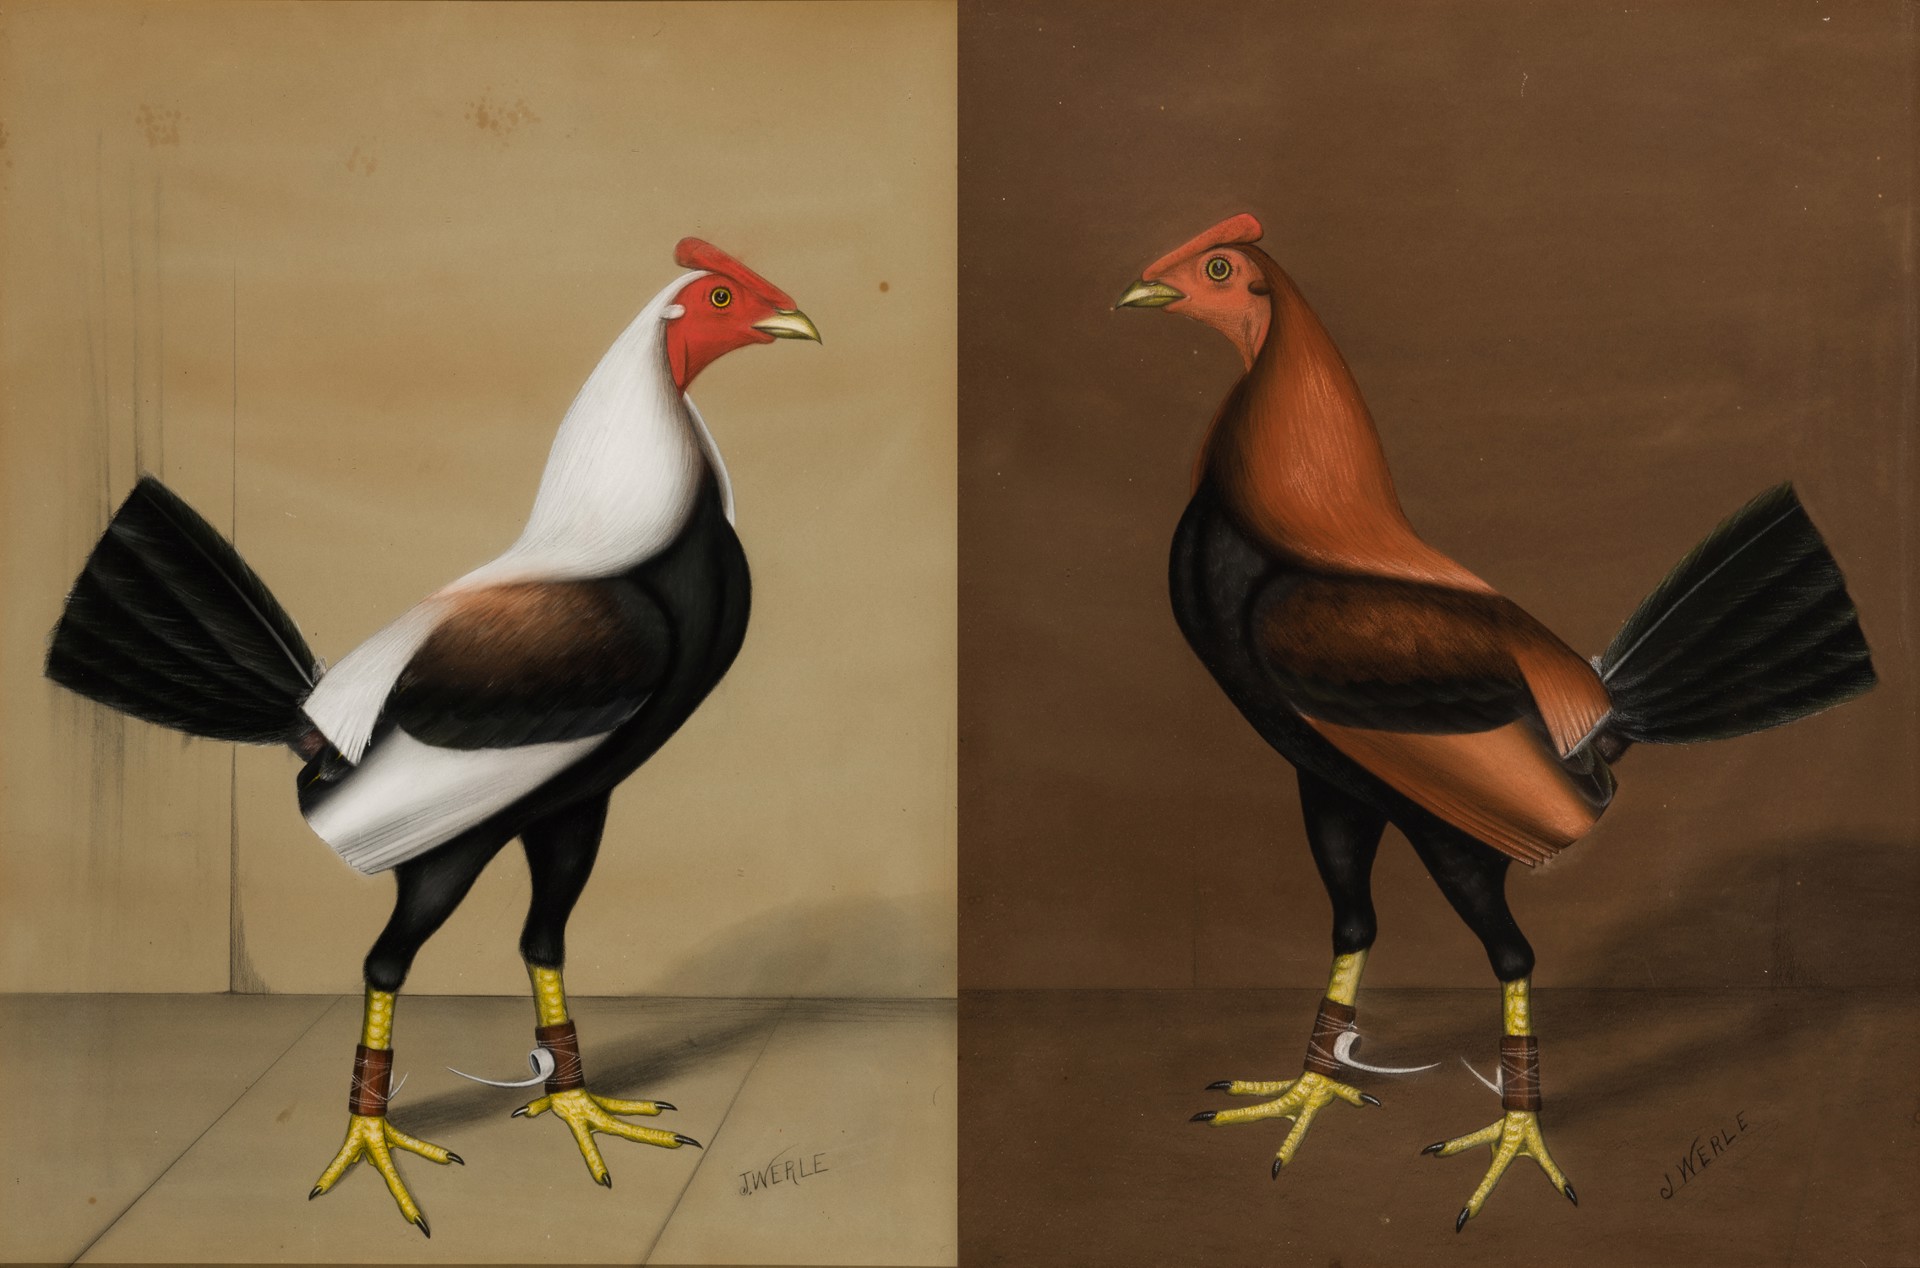 GAMECOCKS (a pair) by J. Werle